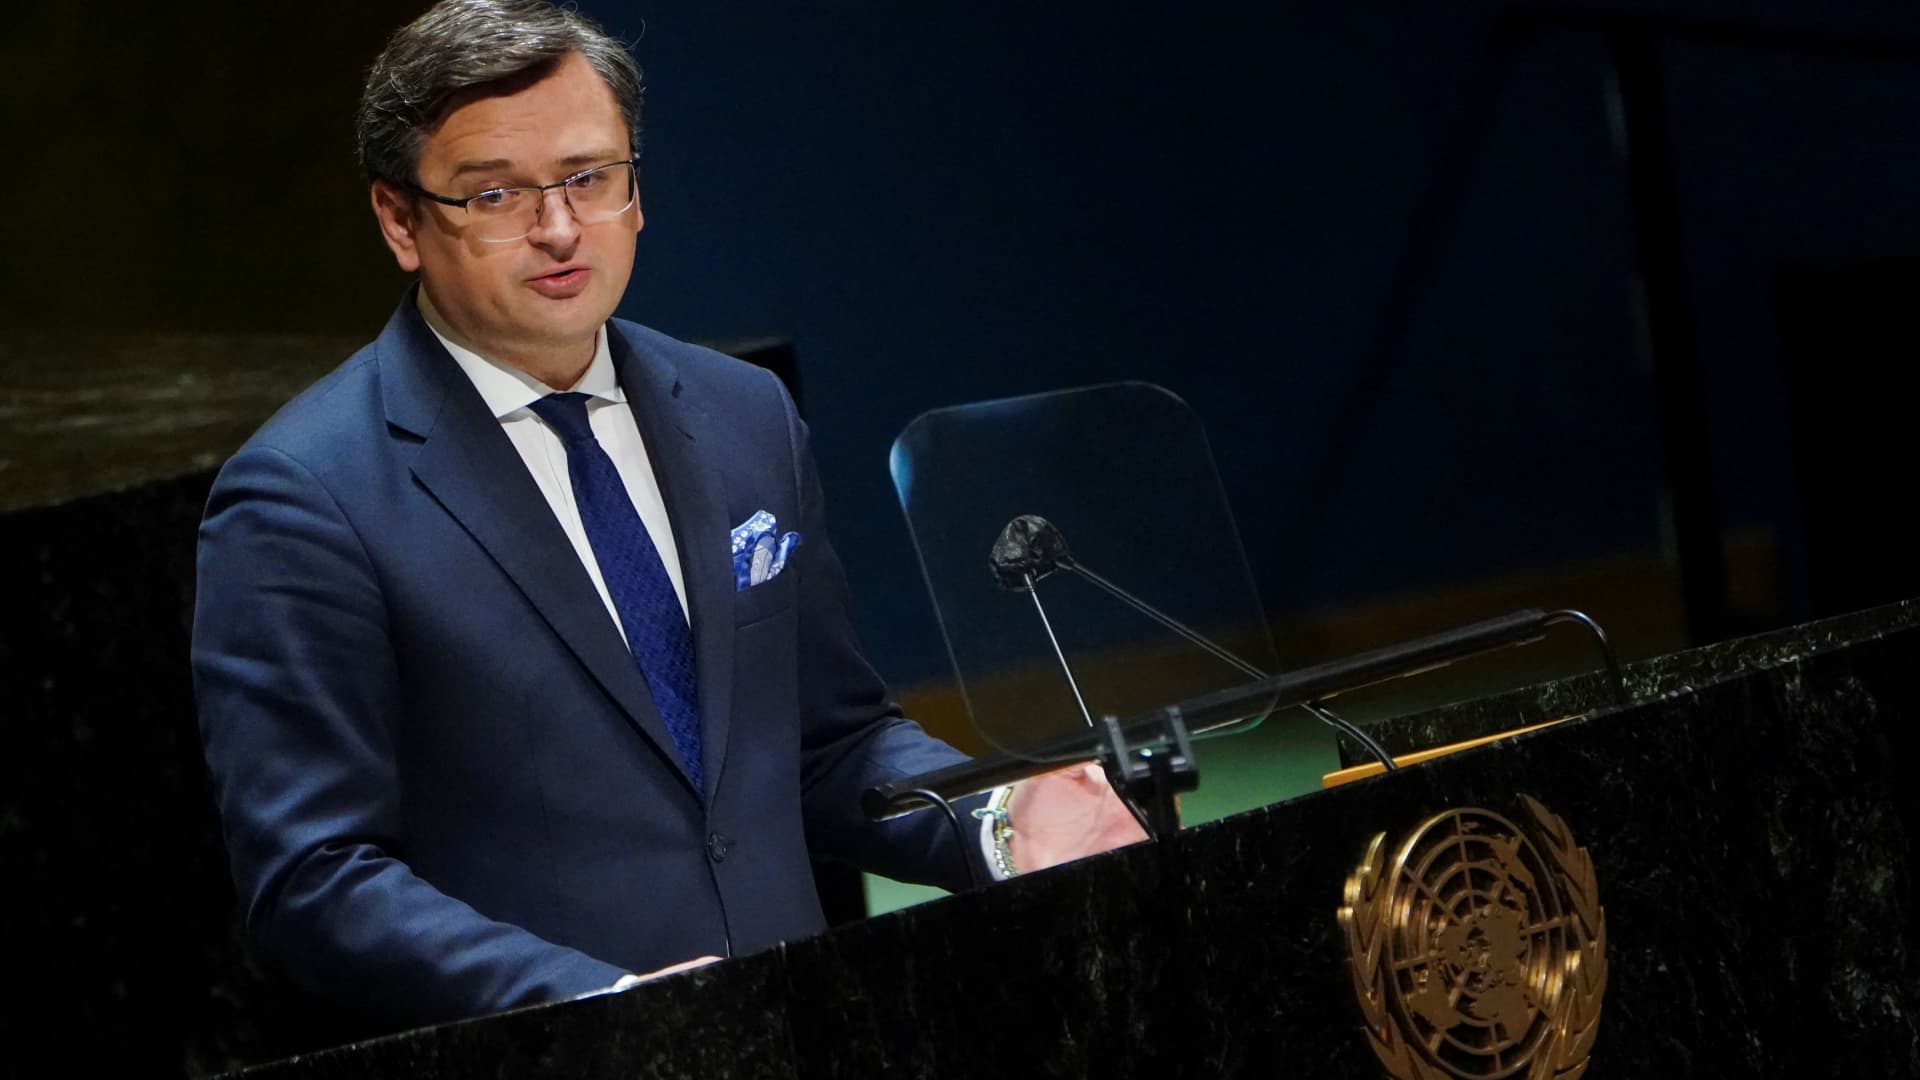 Ukraine's Foreign Minister Dmytro Kuleba speaks during a meeting of the U.N. General Assembly on the situation between Russia and Ukraine, at the United Nations Headquarters in Manhattan, New York City, U.S., February 23, 2022.